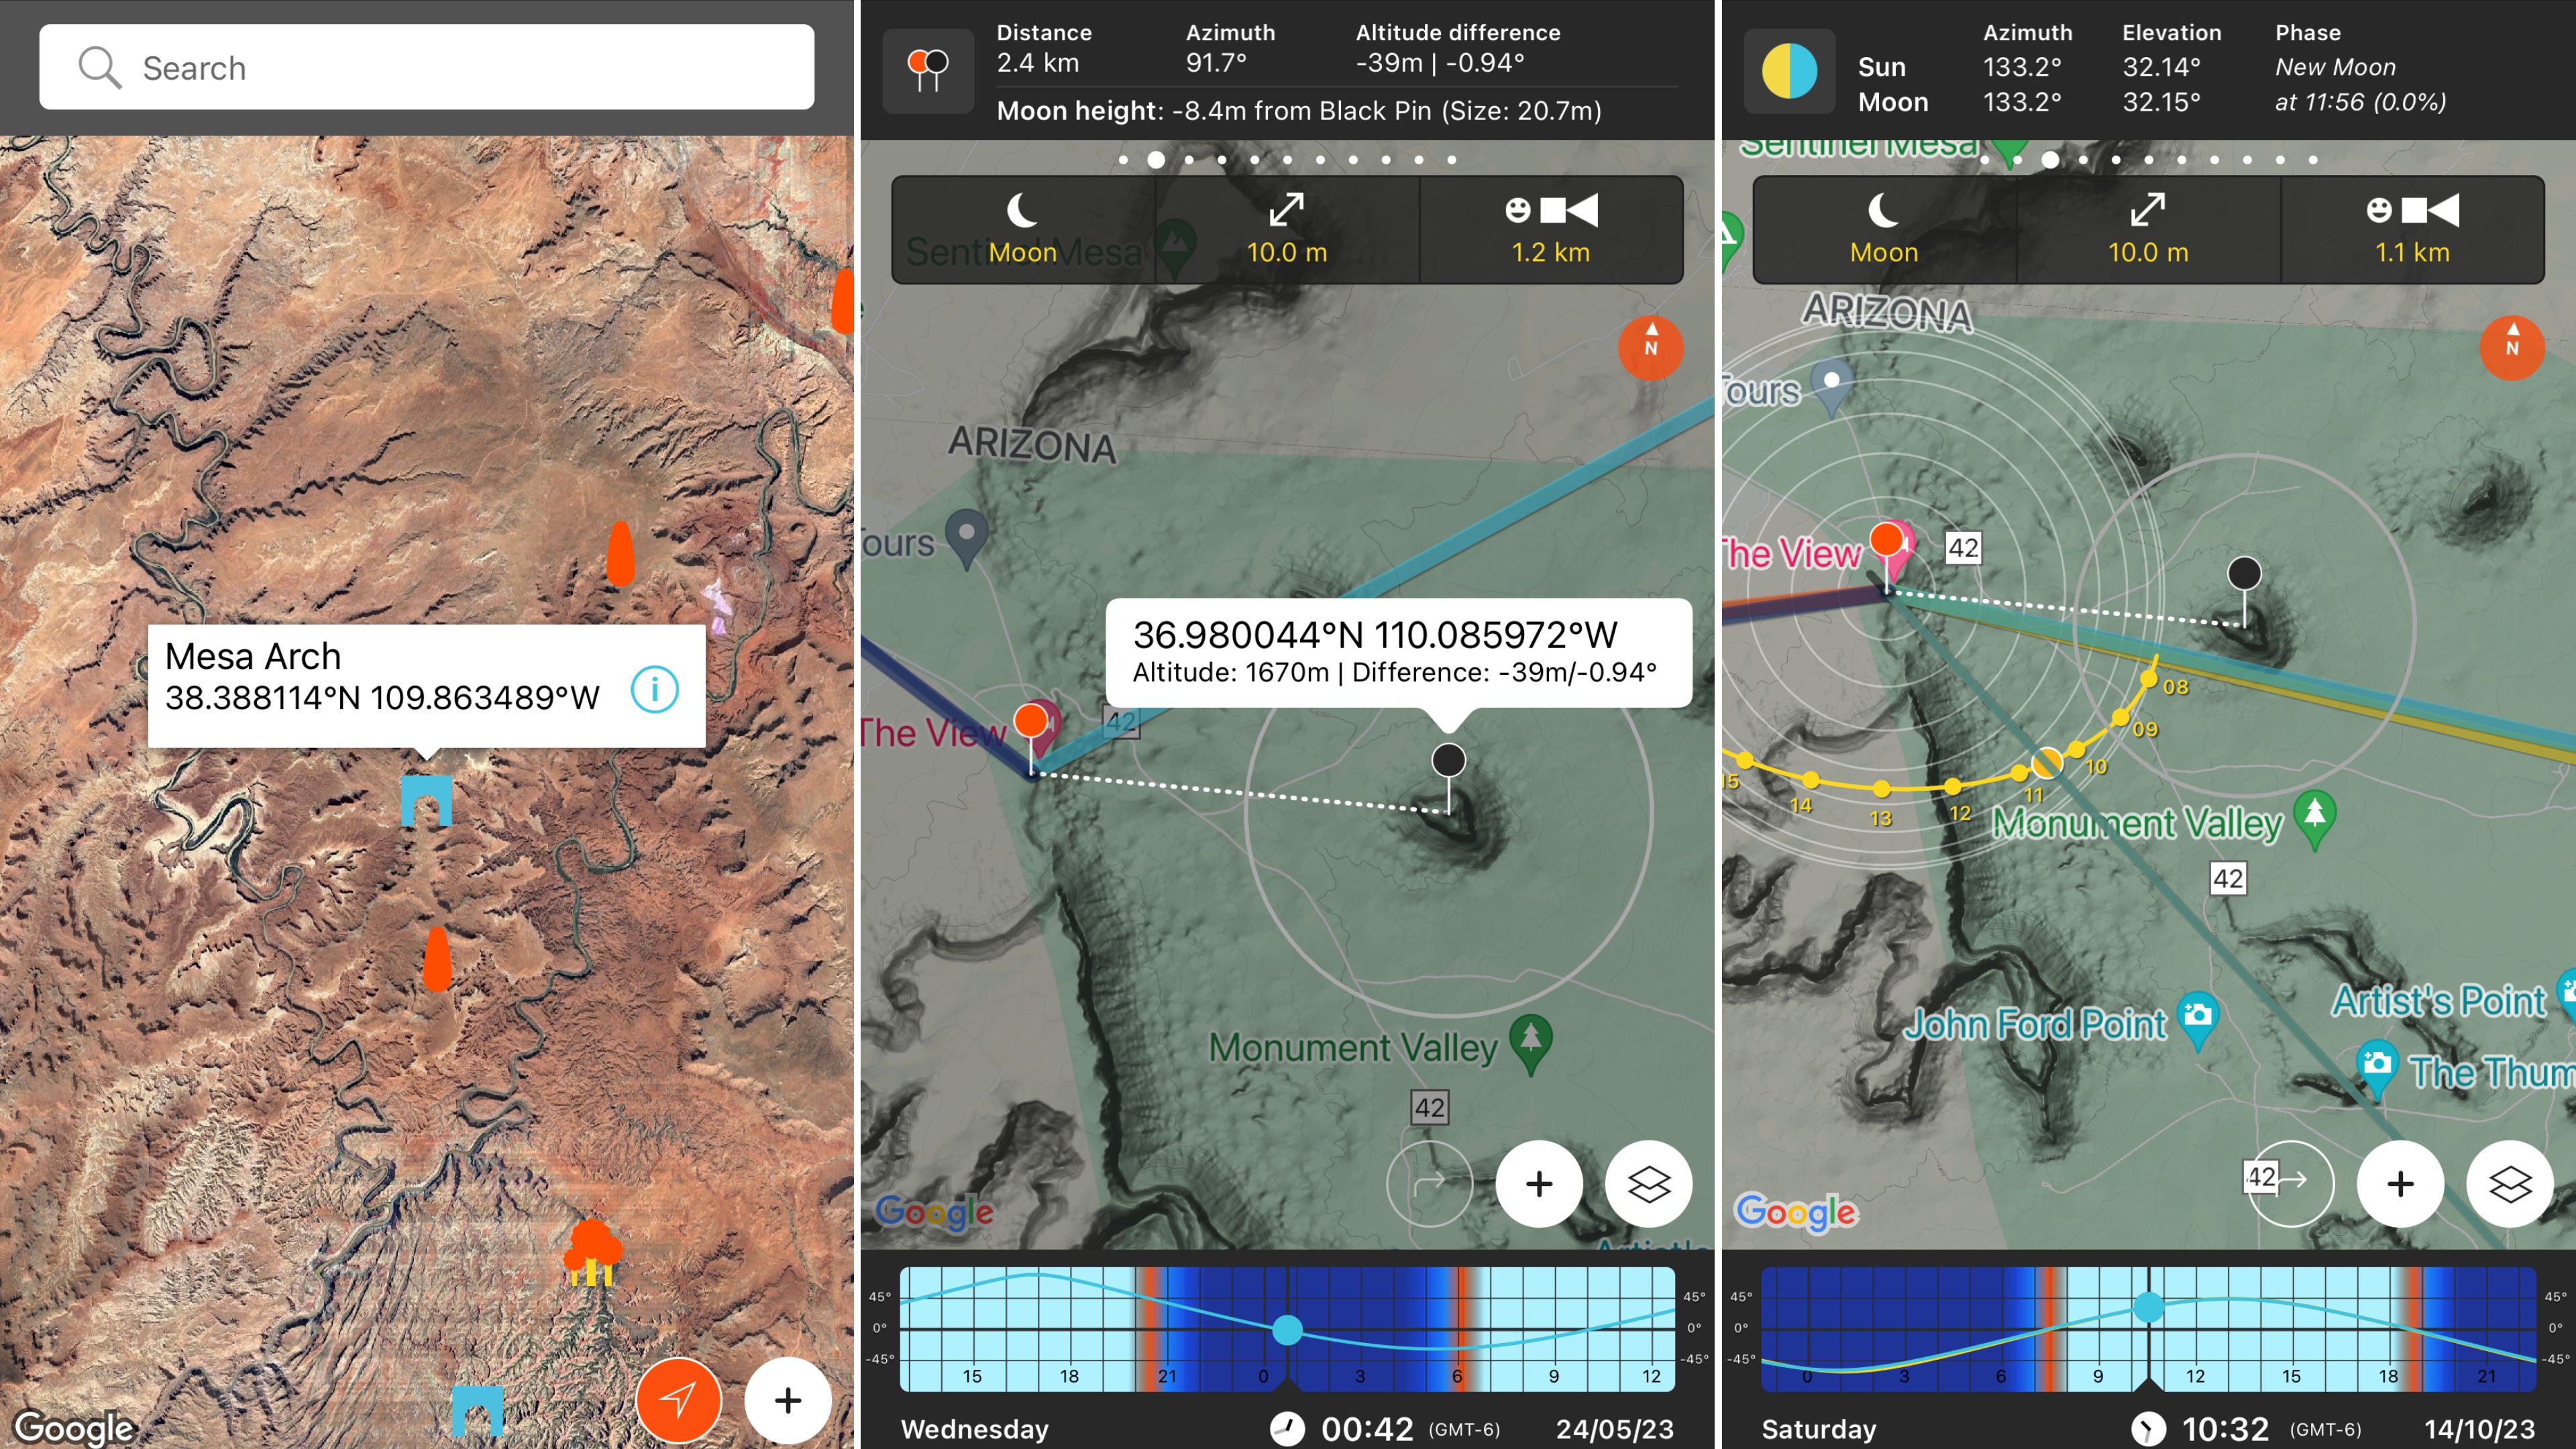 Three images of the Planner section of the app showing a black pin on the map representing the target subject and a red pin on the map representing the optimal shooting location. Statistics such as the distance, azimuth and altitude difference are shown in a black banner at the top of the map.